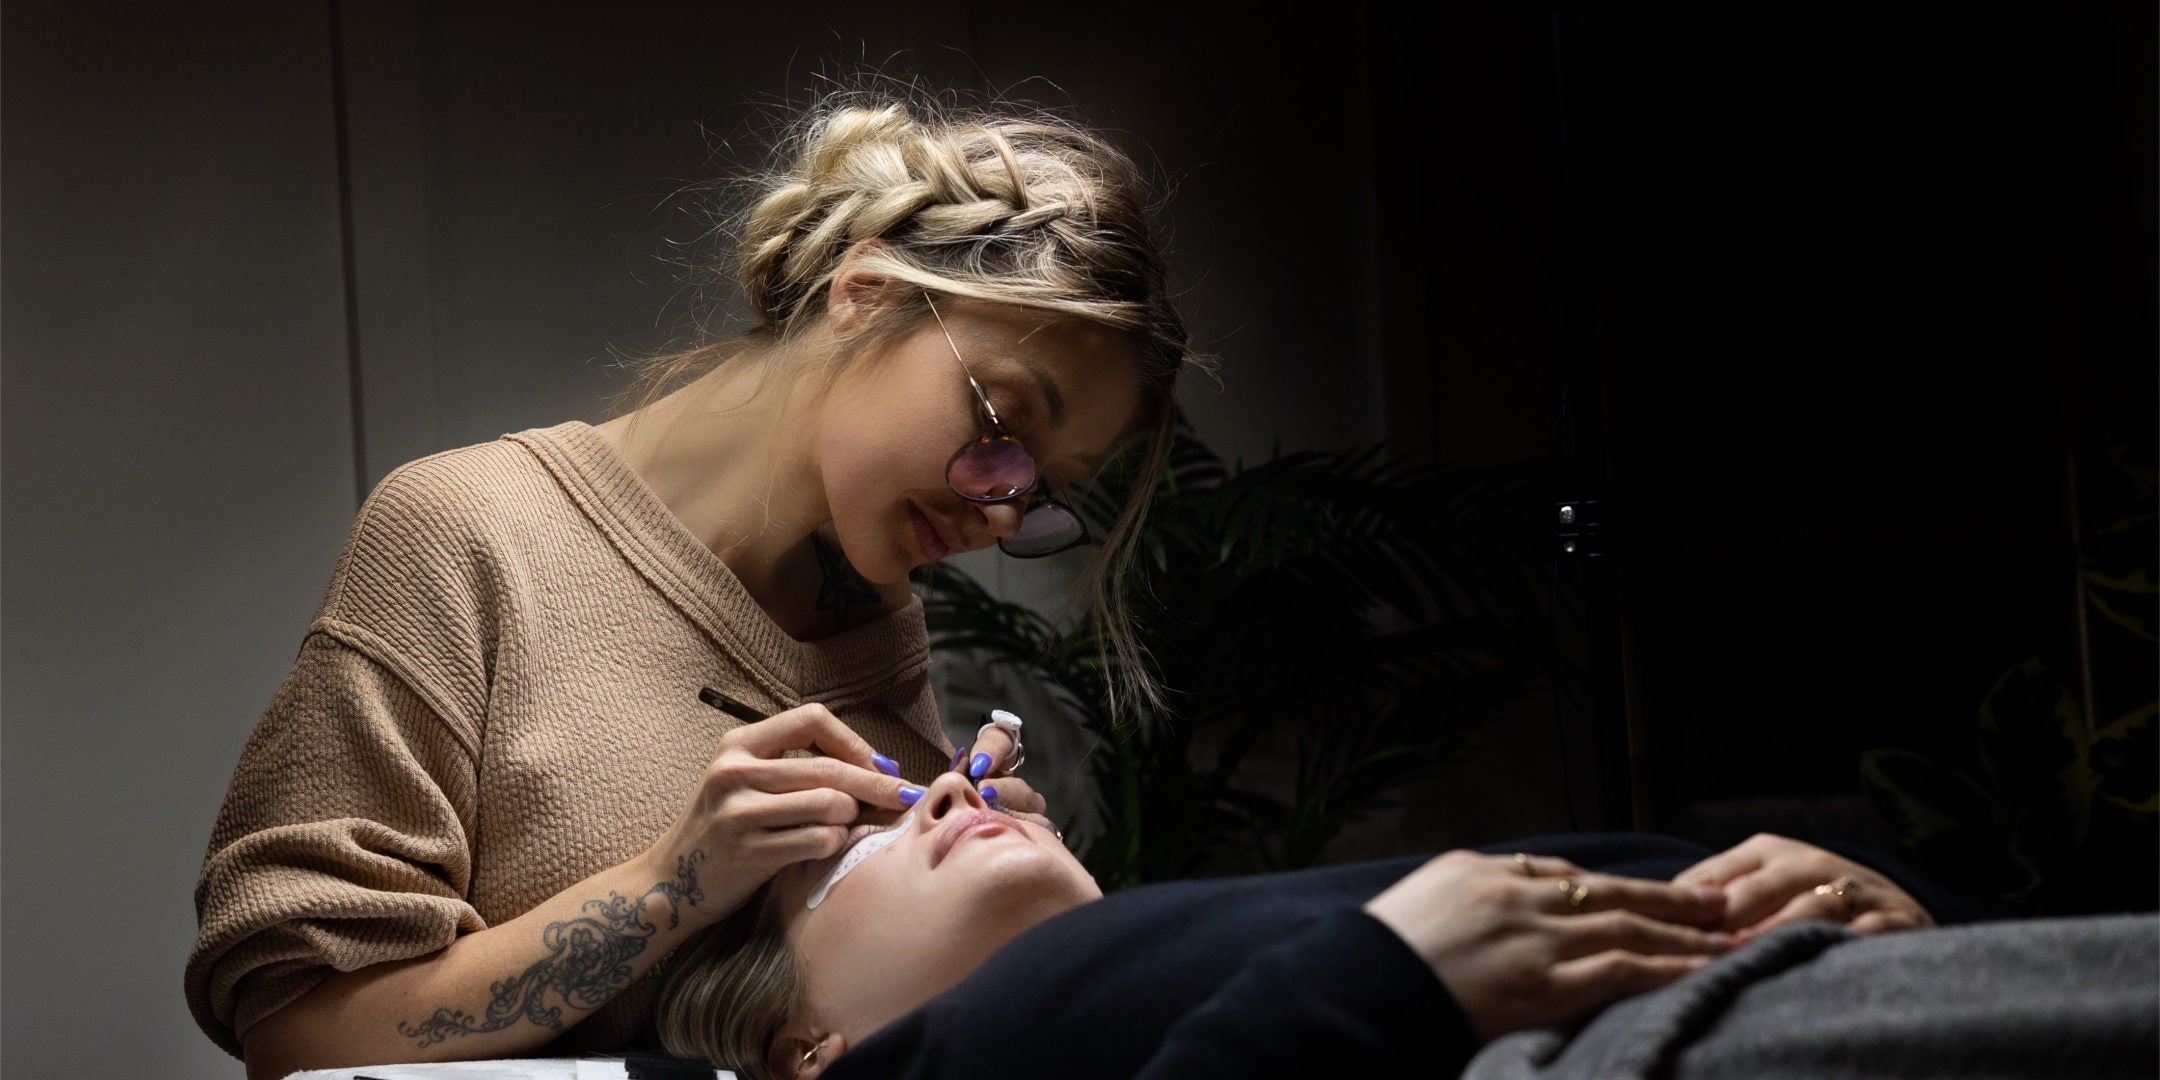 Lost Artistry: Kaitlyn applying eyelash extension to a client - Professional lash application with precision and care